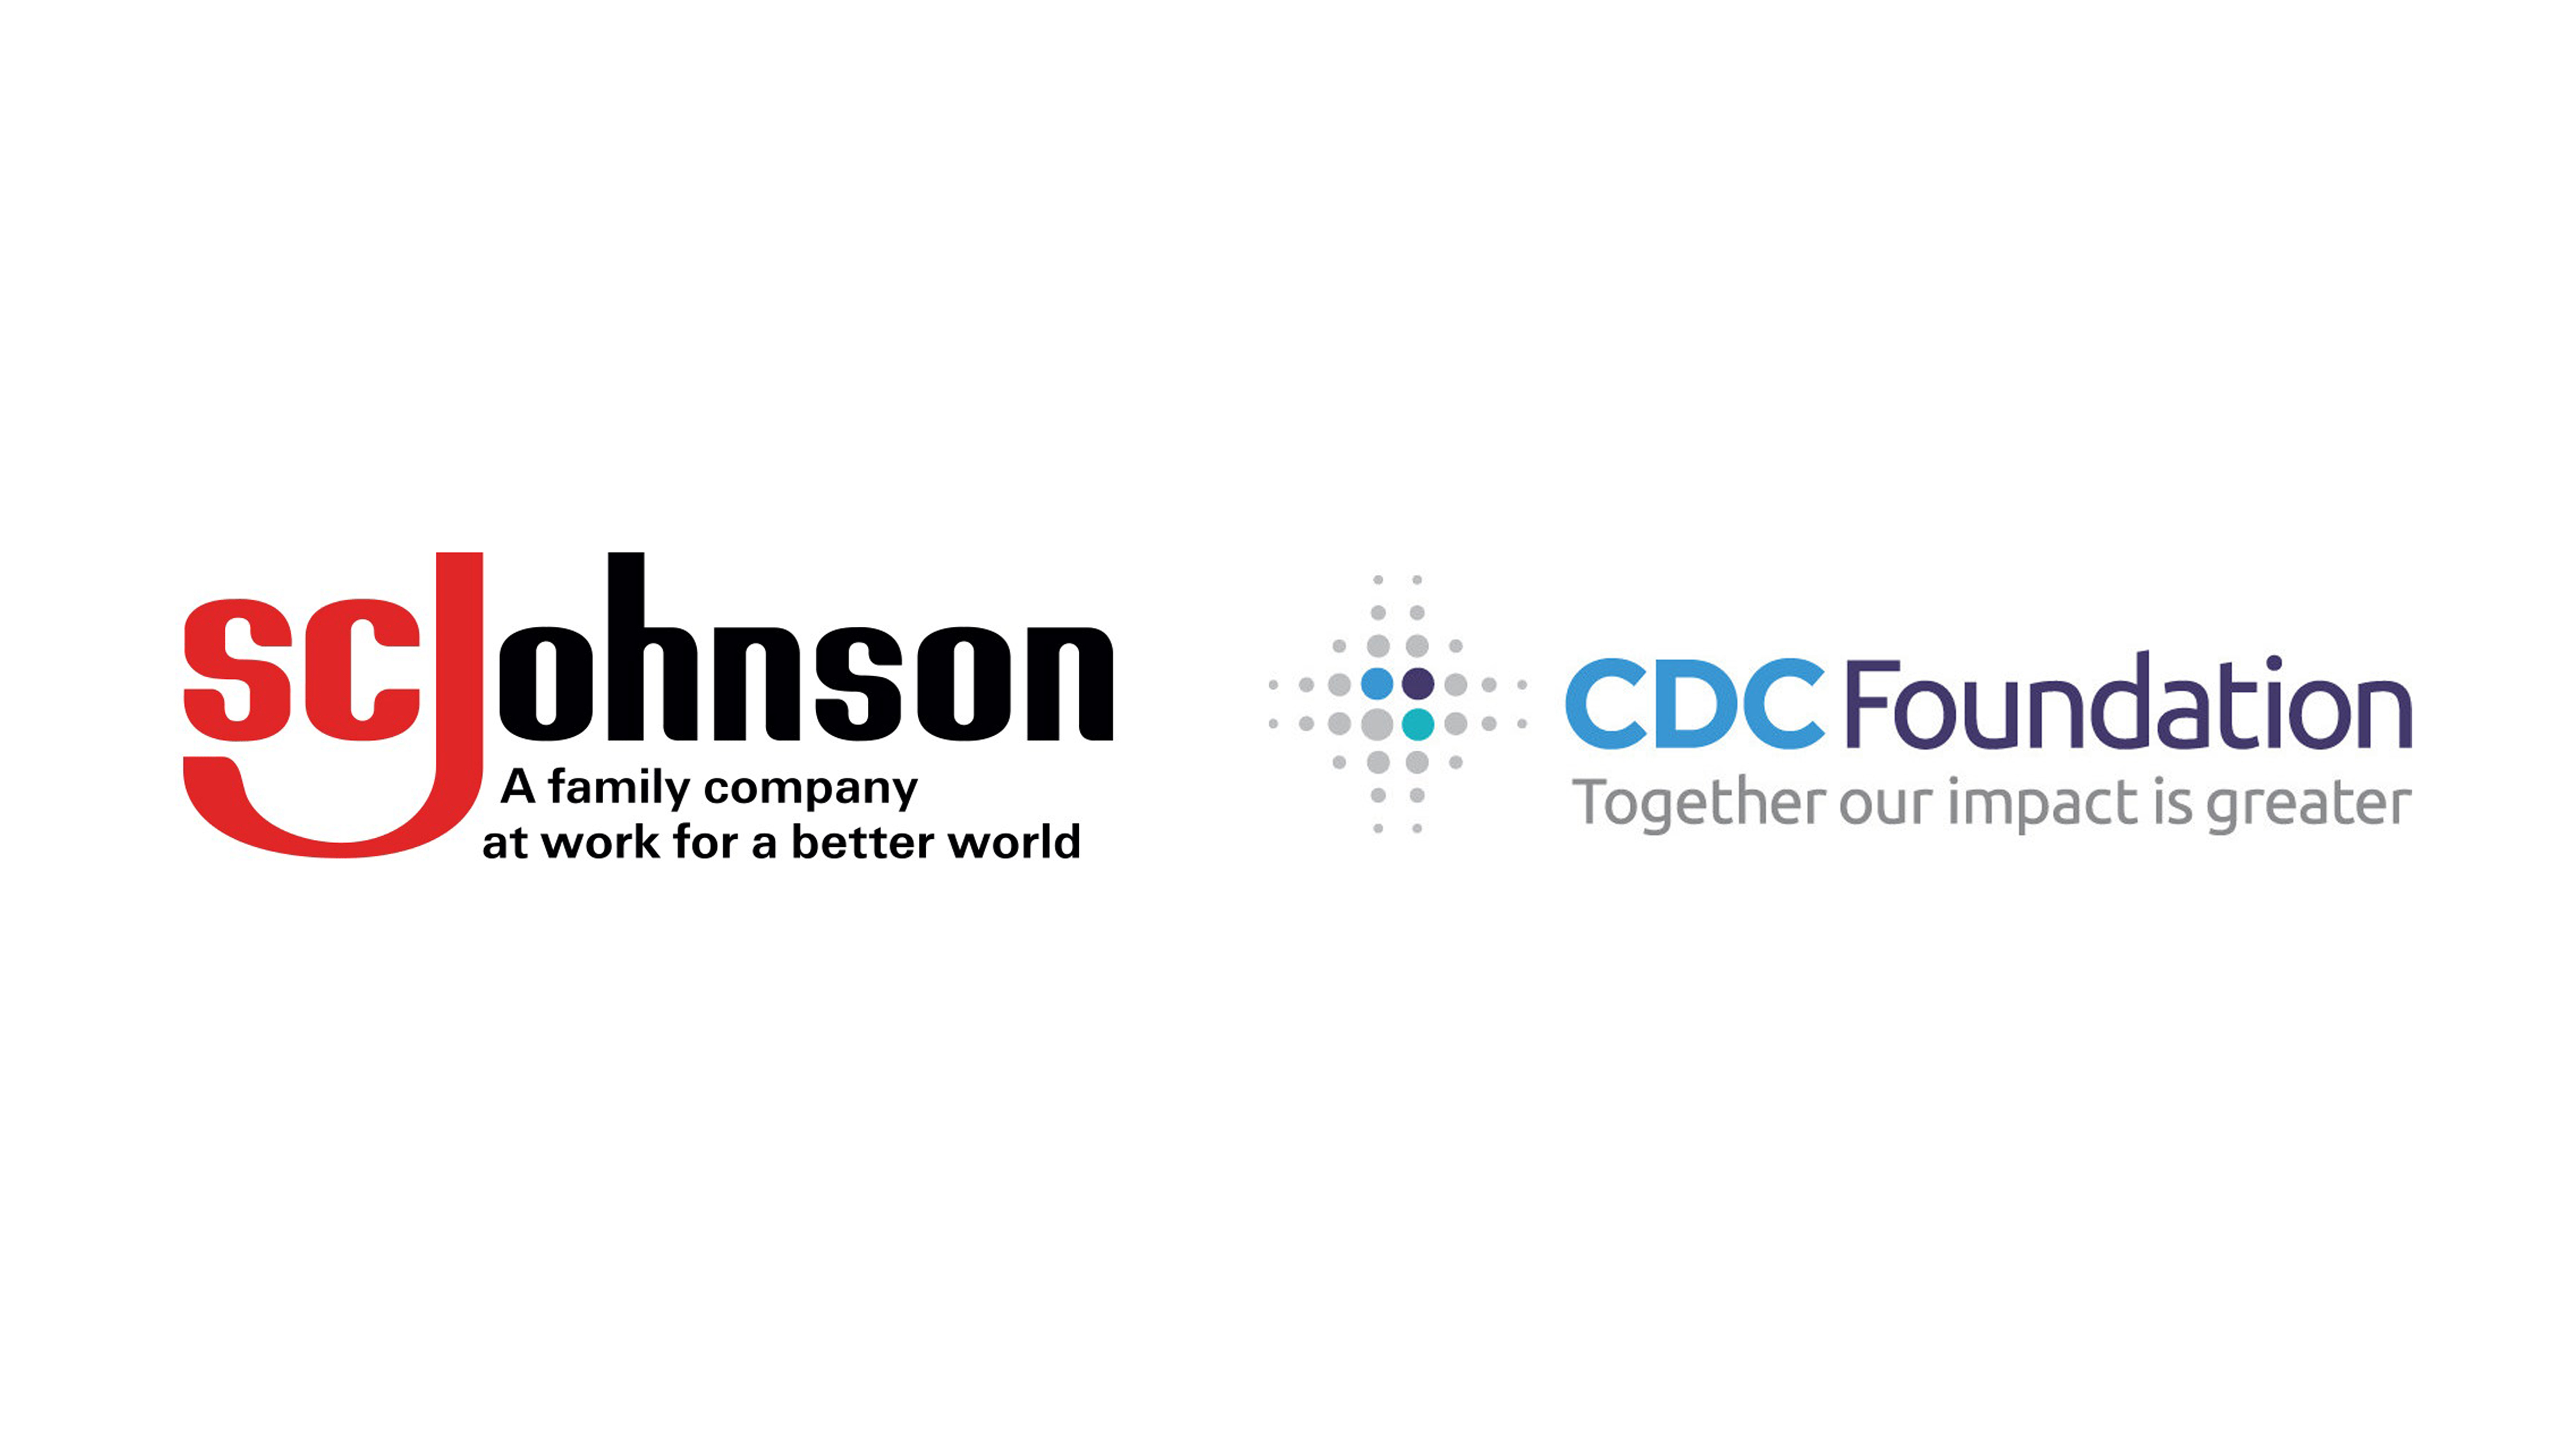 Sc Johnson and the CDC Foundation